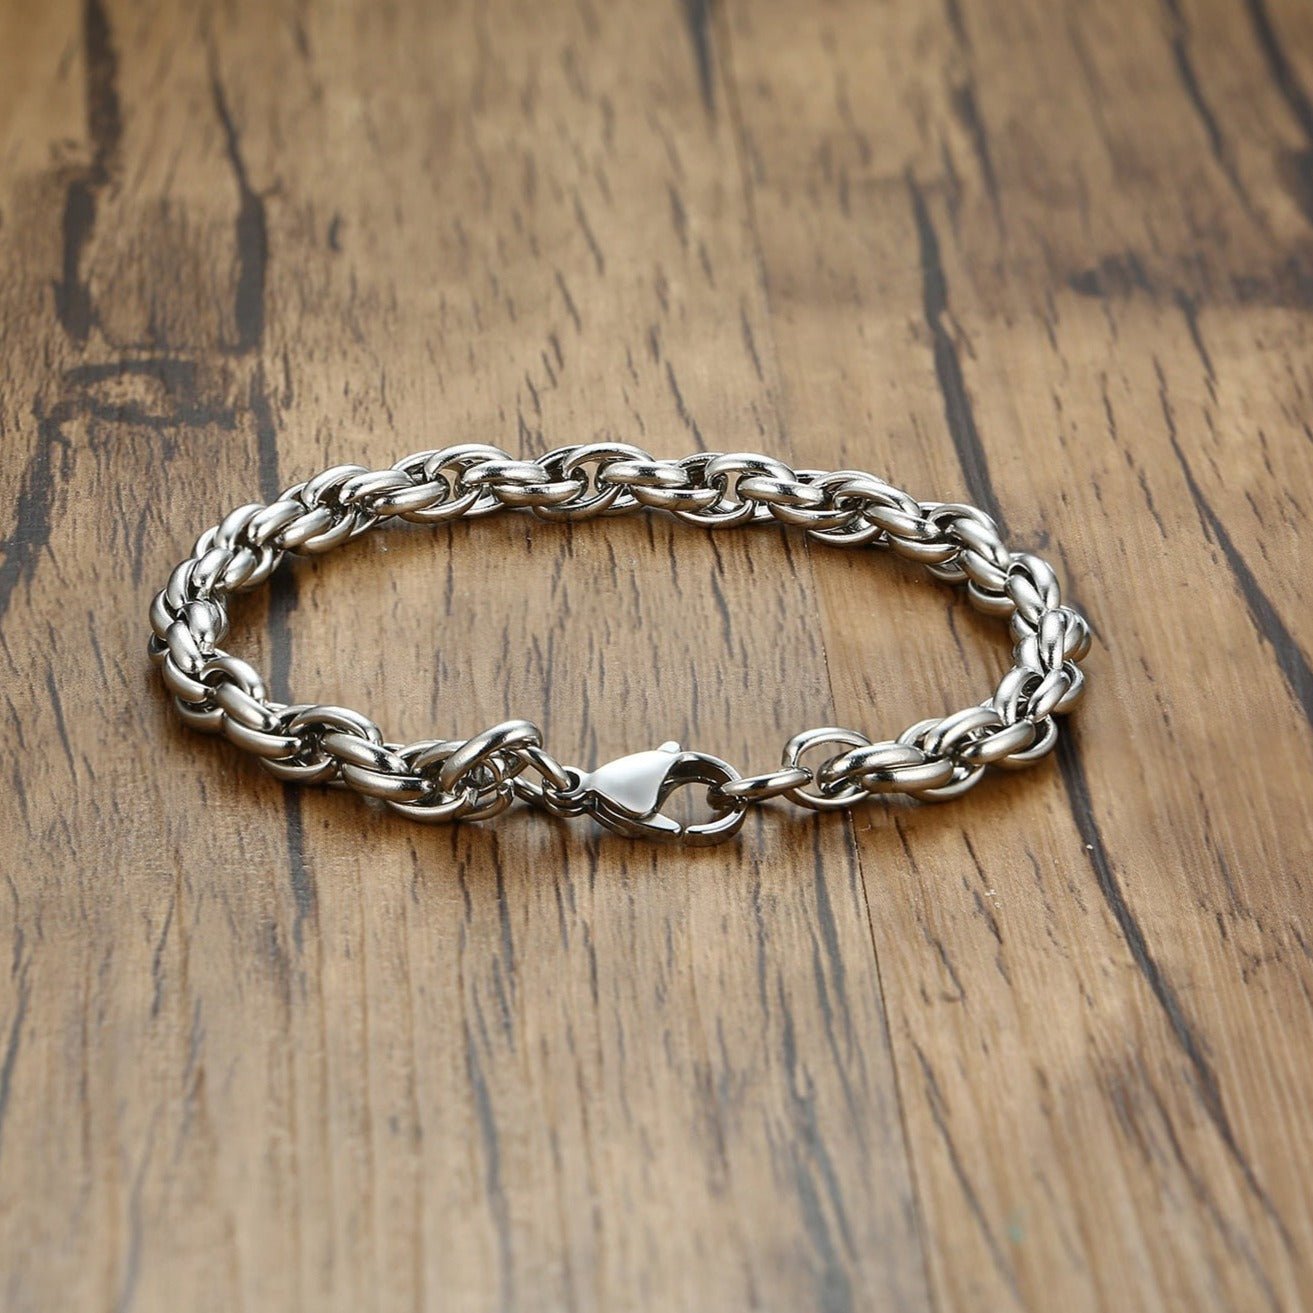 Clavio Twisted Rope Chain Bracelet - BERML BY DESIGN JEWELRY FOR MEN